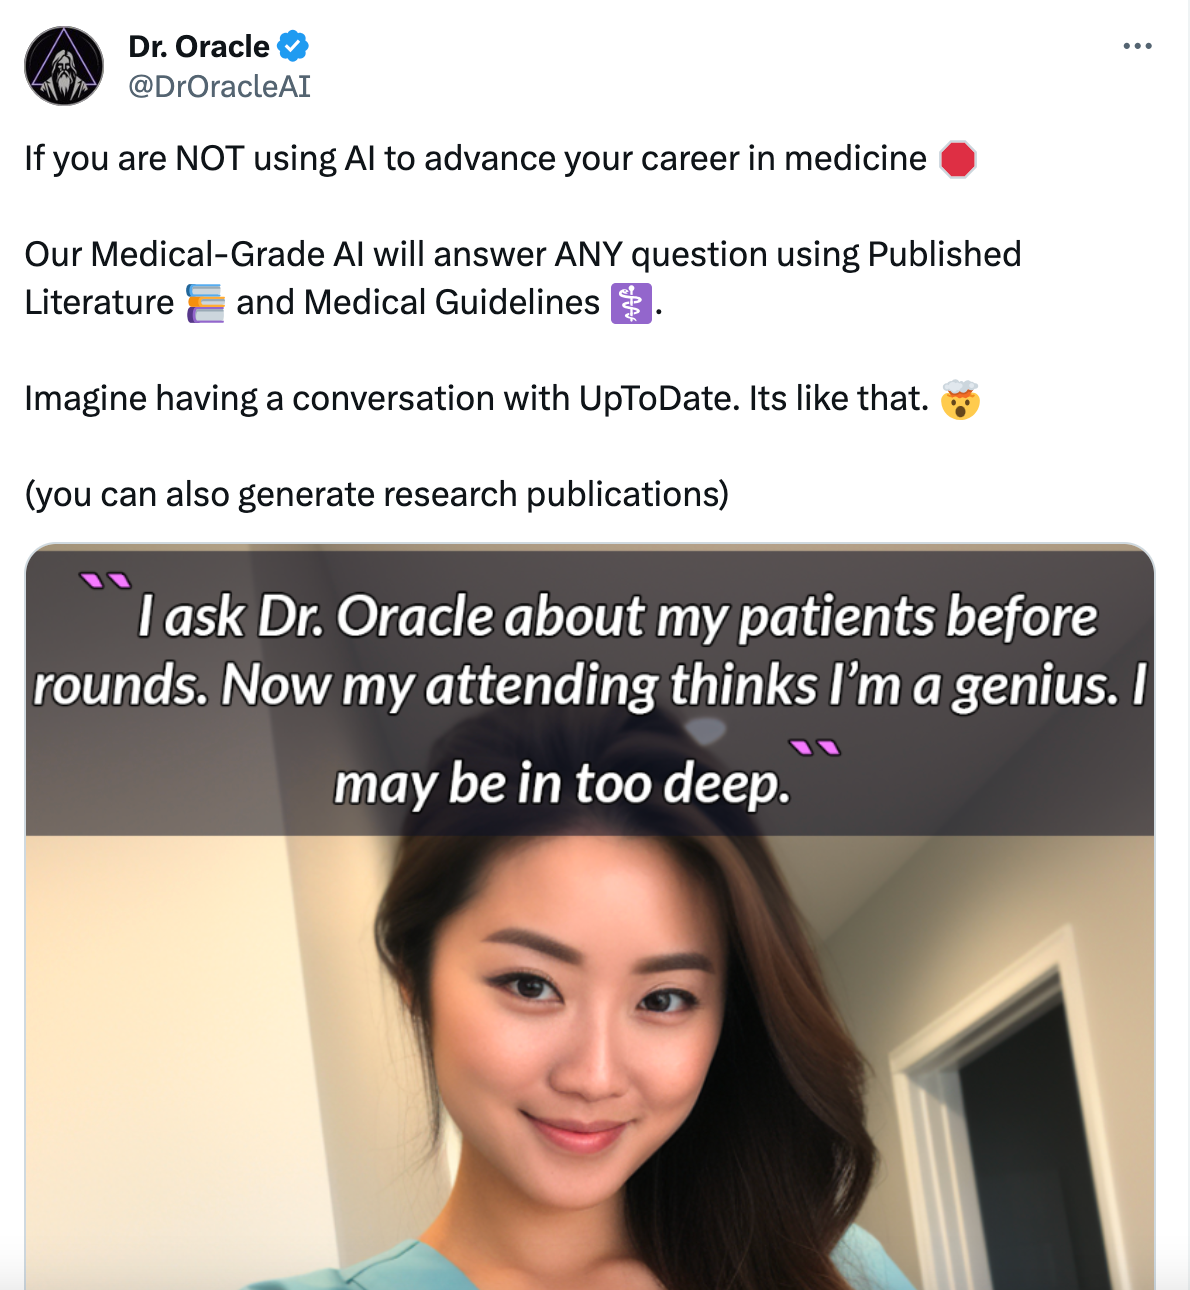 DrOracleAI: if you are not using AI to advance your career in medicine, stop - our medical grade AI will answer any question using published literature and medical guidelines. You can also generate research publications.